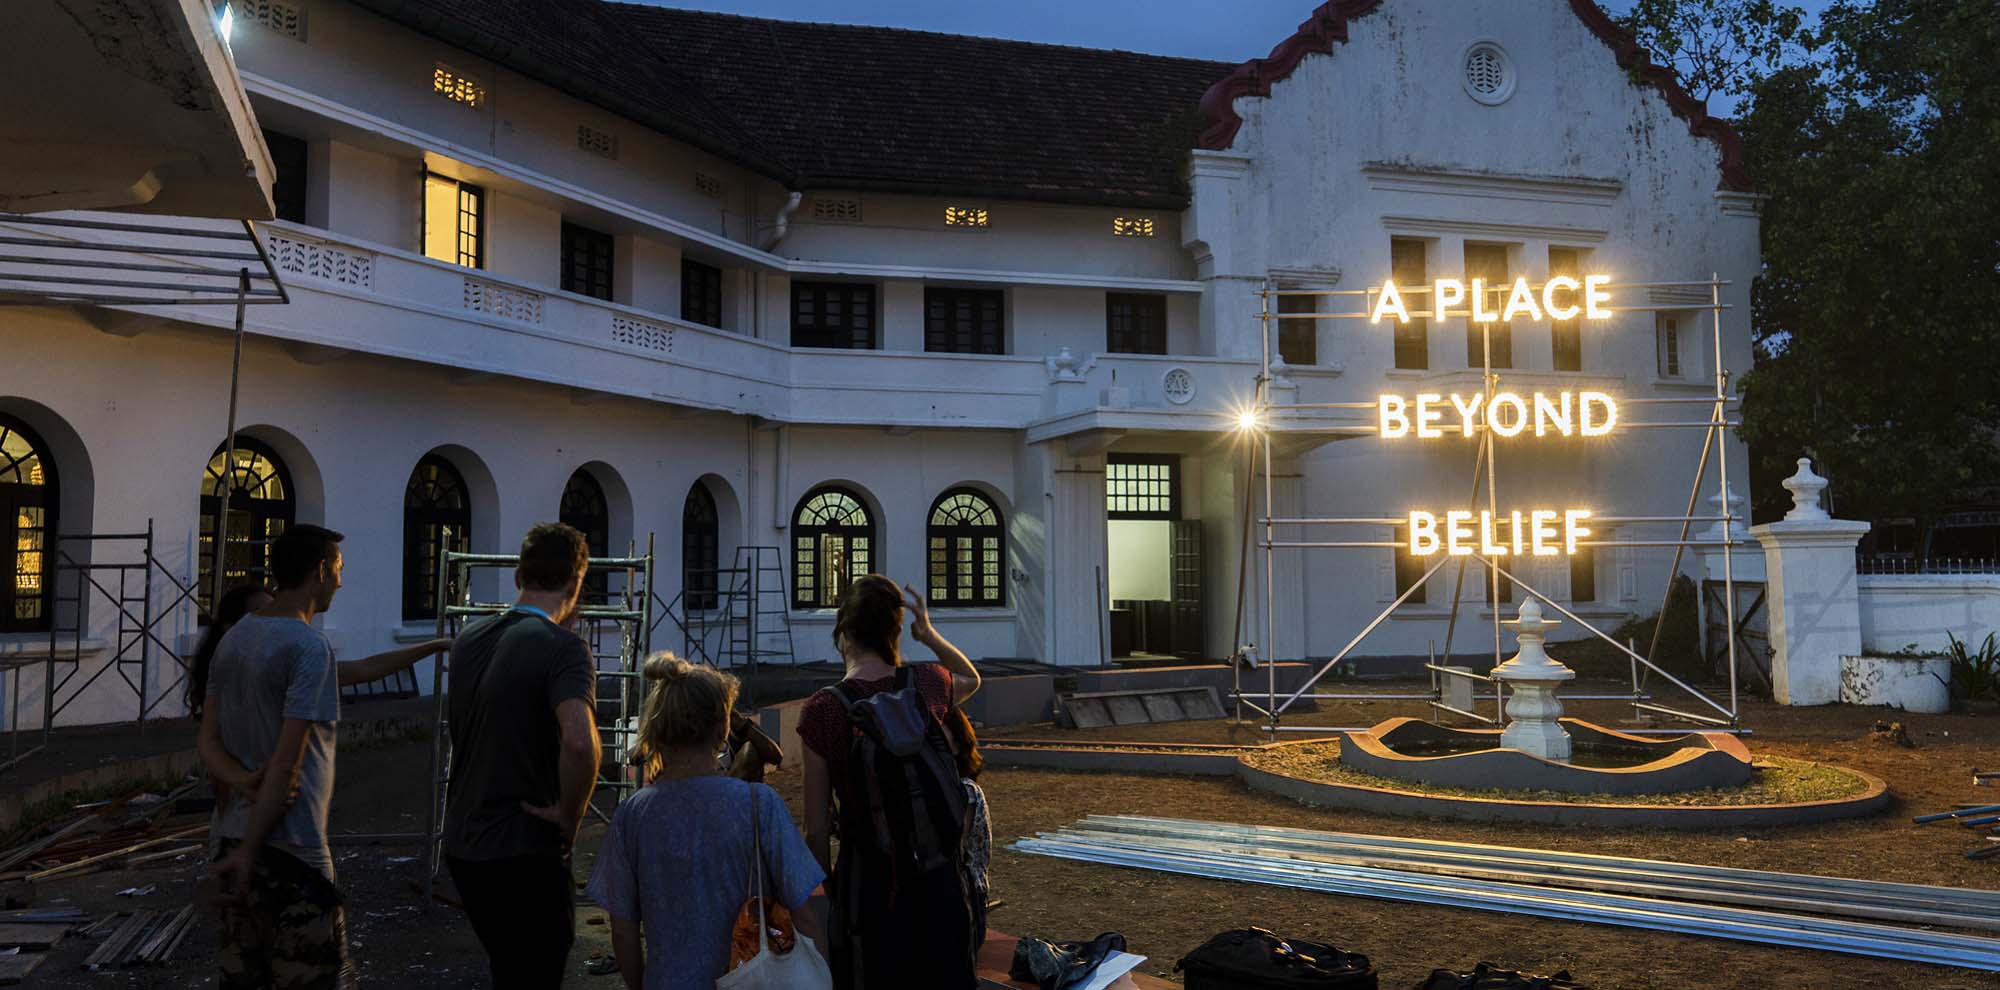 An illuminated sign with the English text, ‘A Place Beyond Relief’ is installed on a metal framework outside a white building with a group of people admiring it.